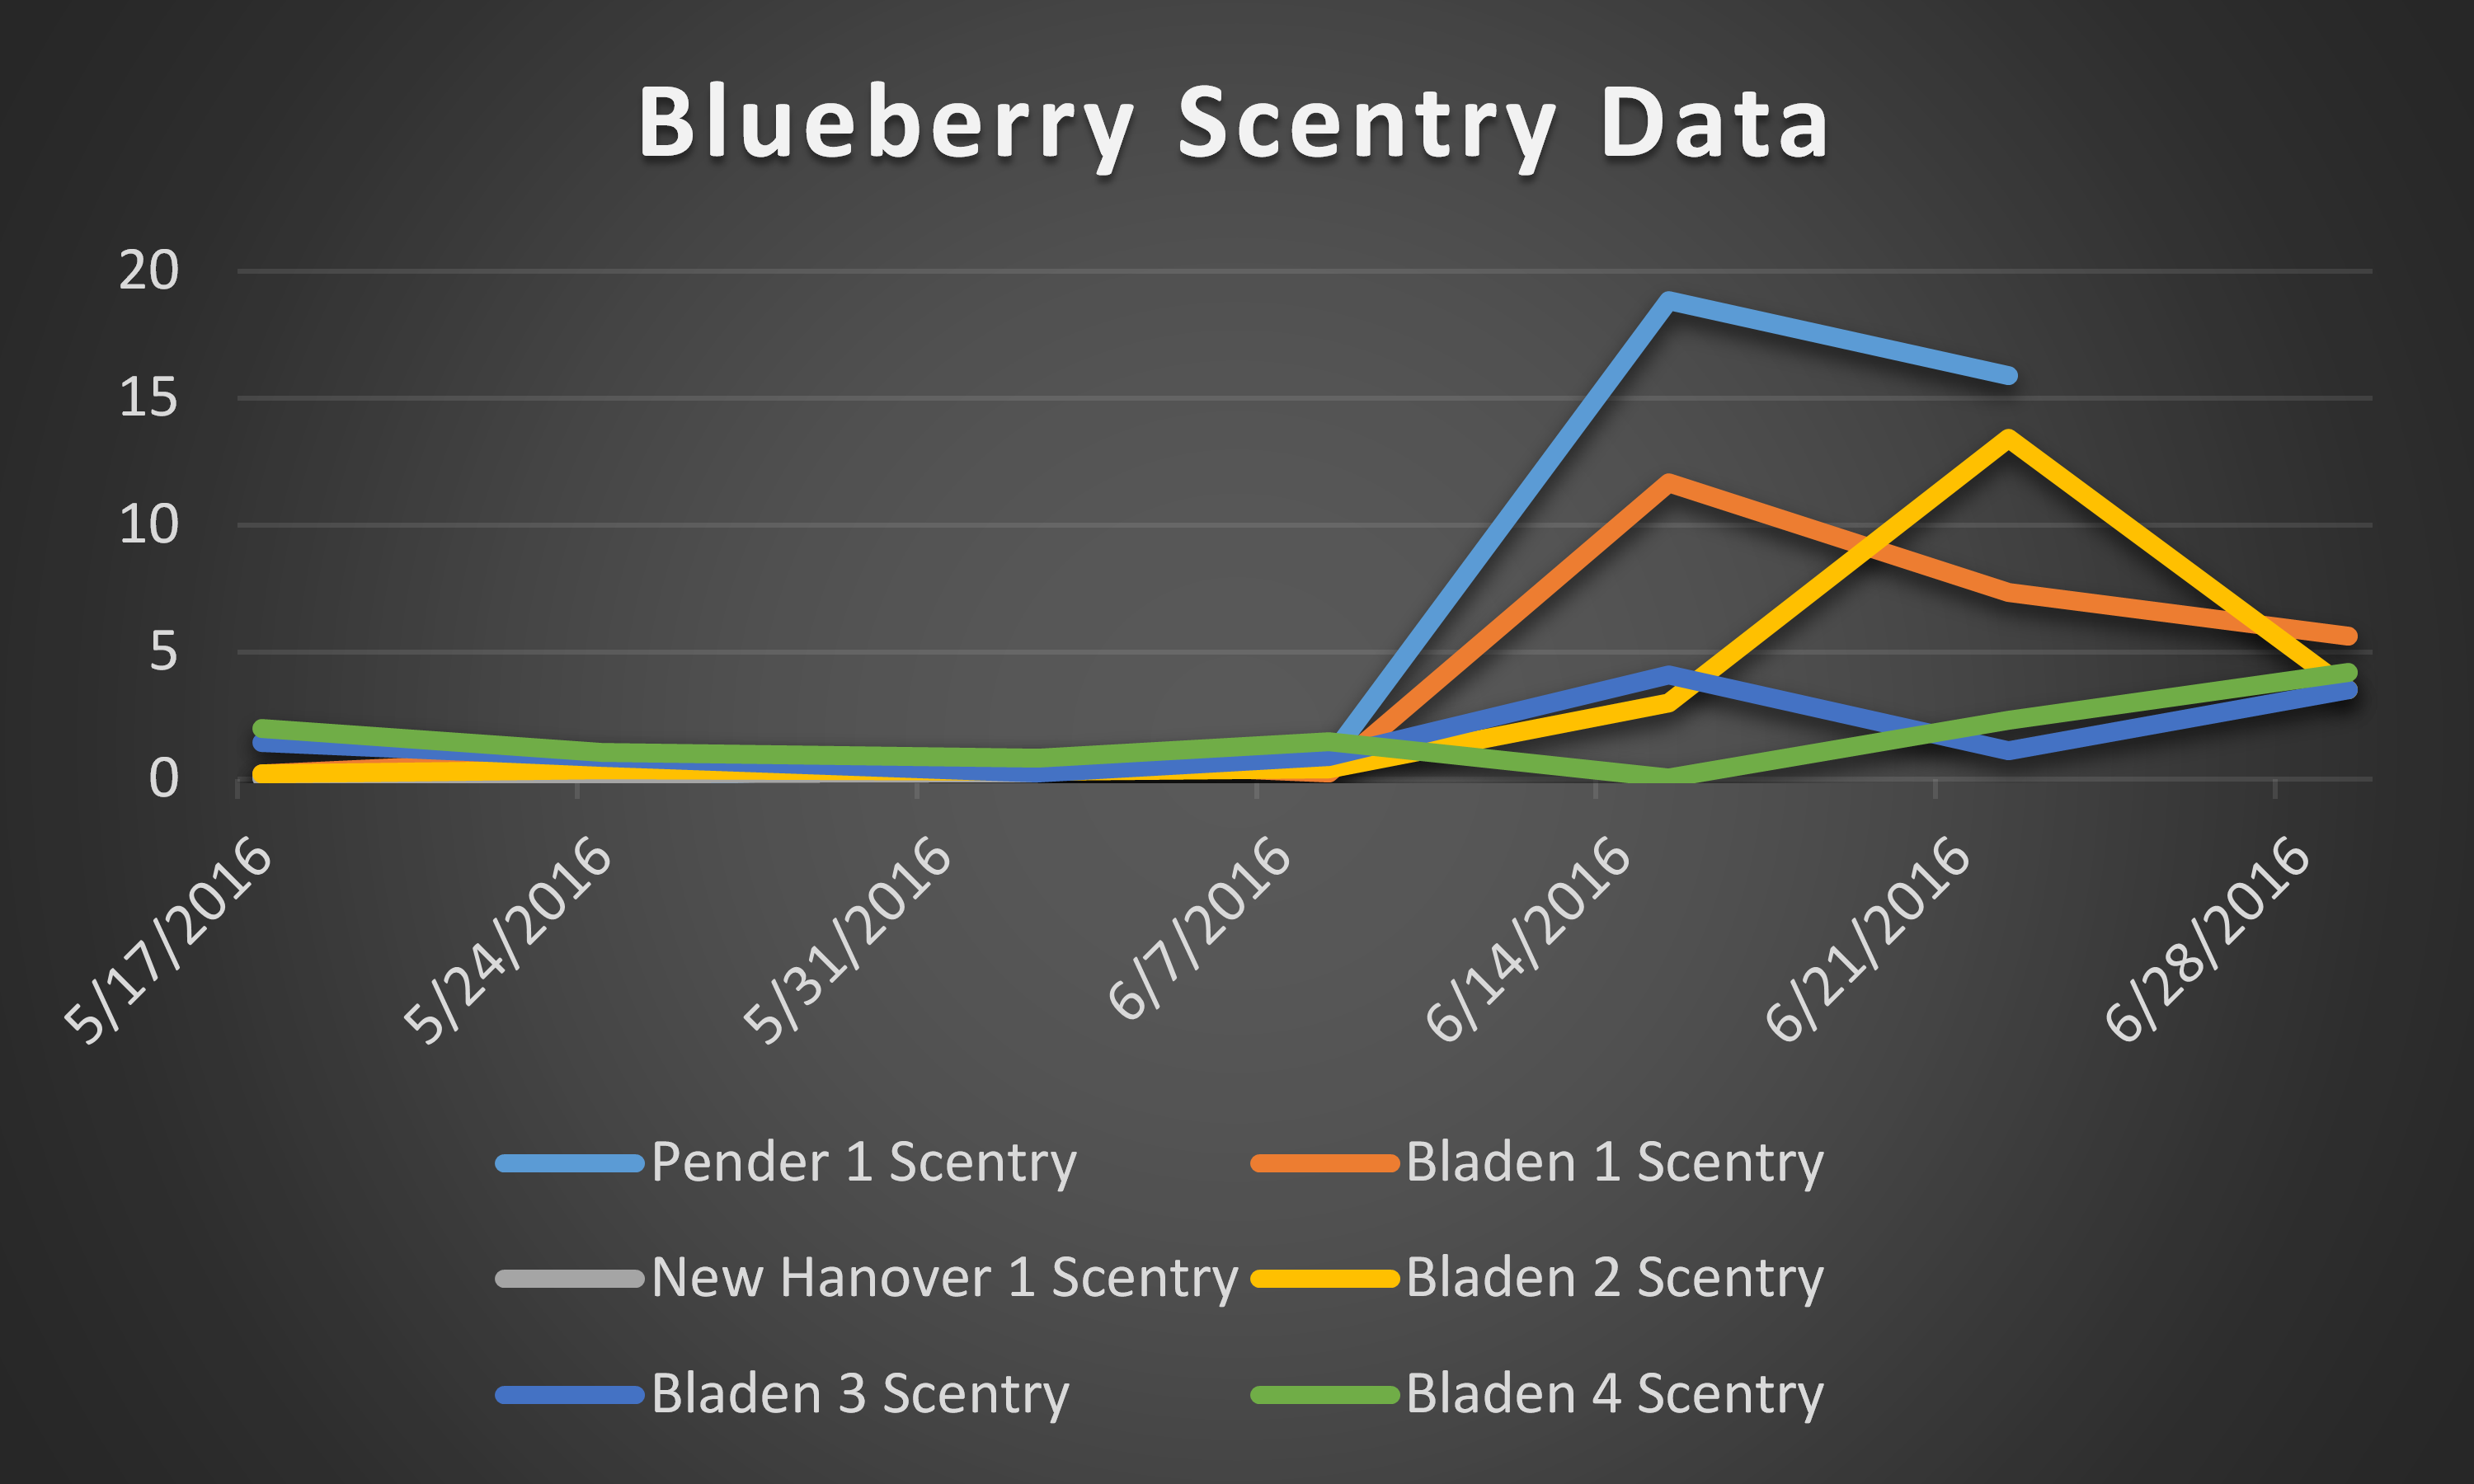 2016 blueberry scentry data